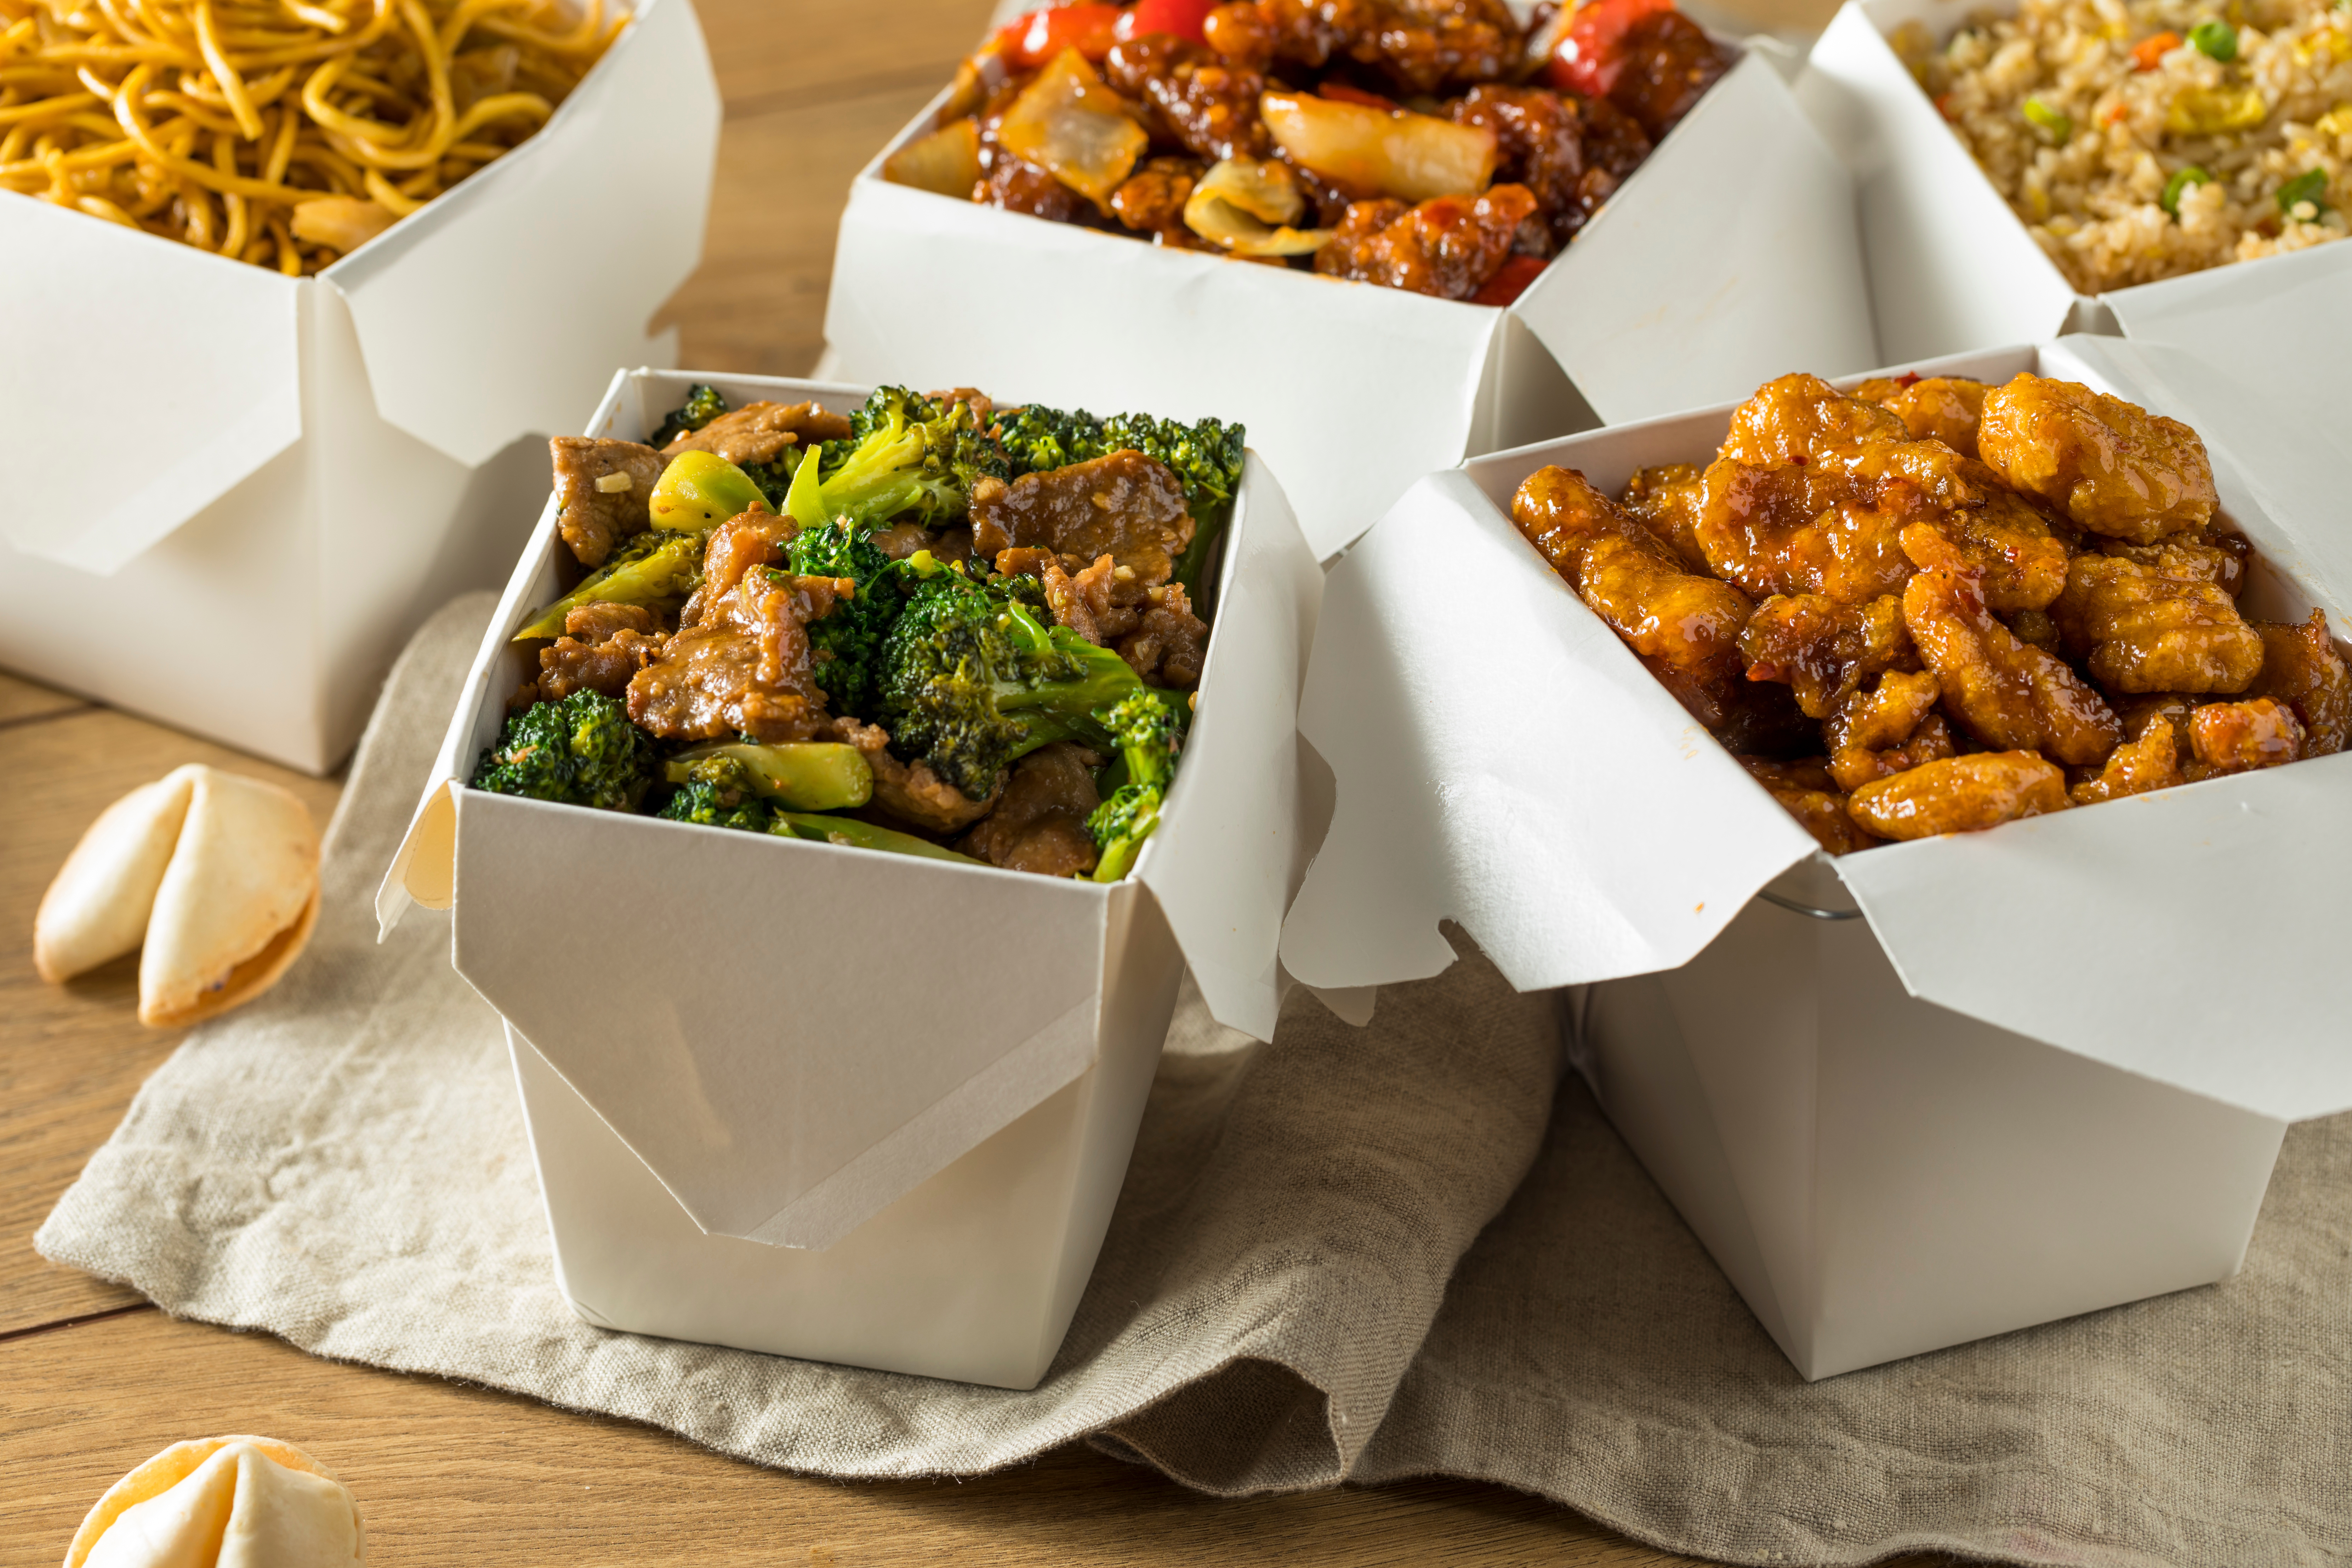 Chinese takeout | Source: Shutterstock